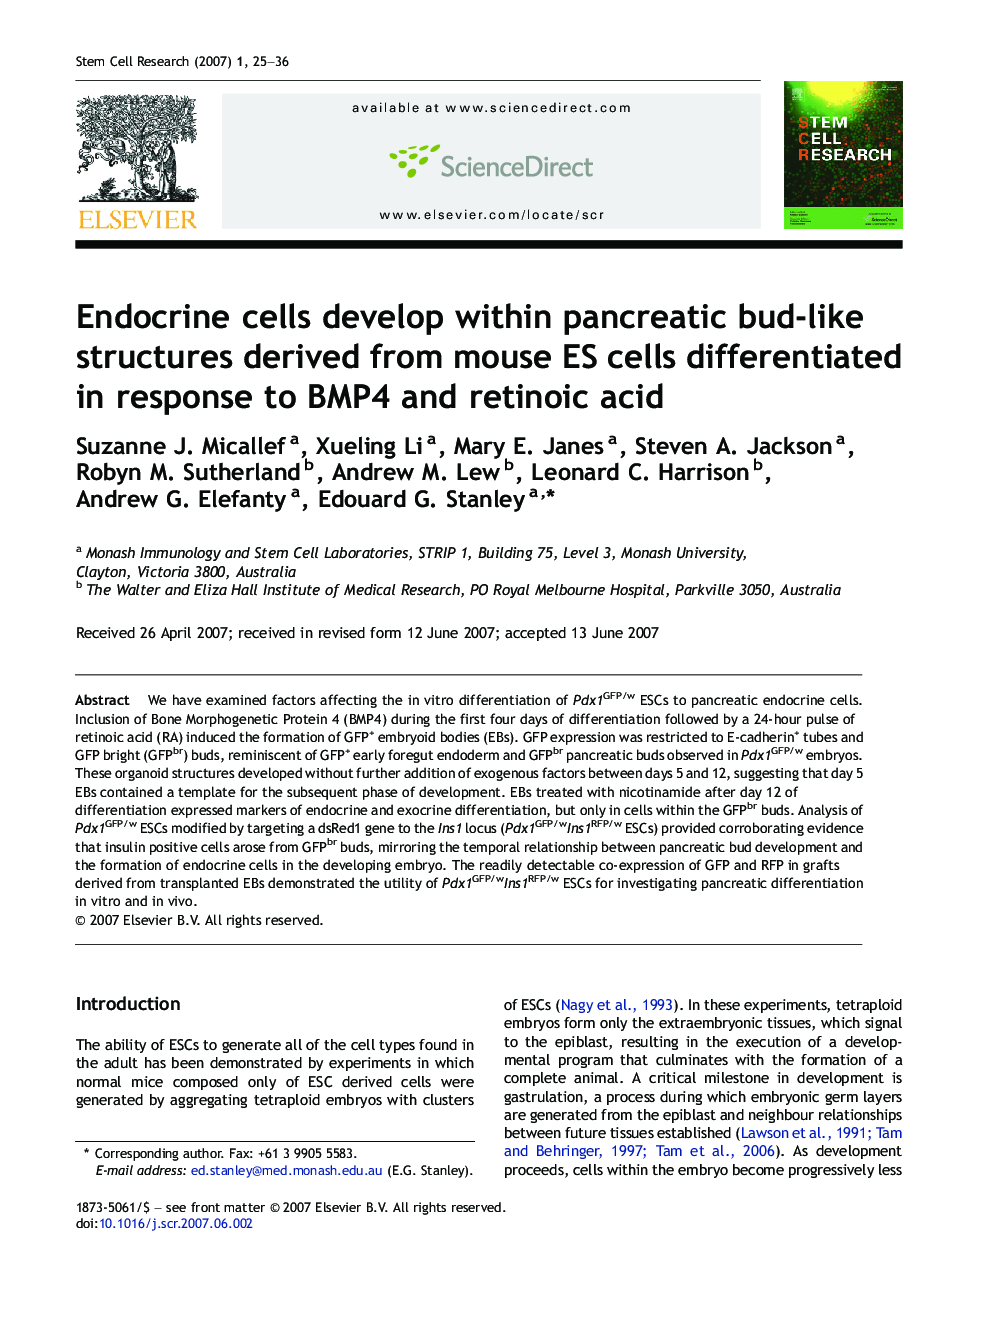 Endocrine cells develop within pancreatic bud-like structures derived from mouse ES cells differentiated in response to BMP4 and retinoic acid